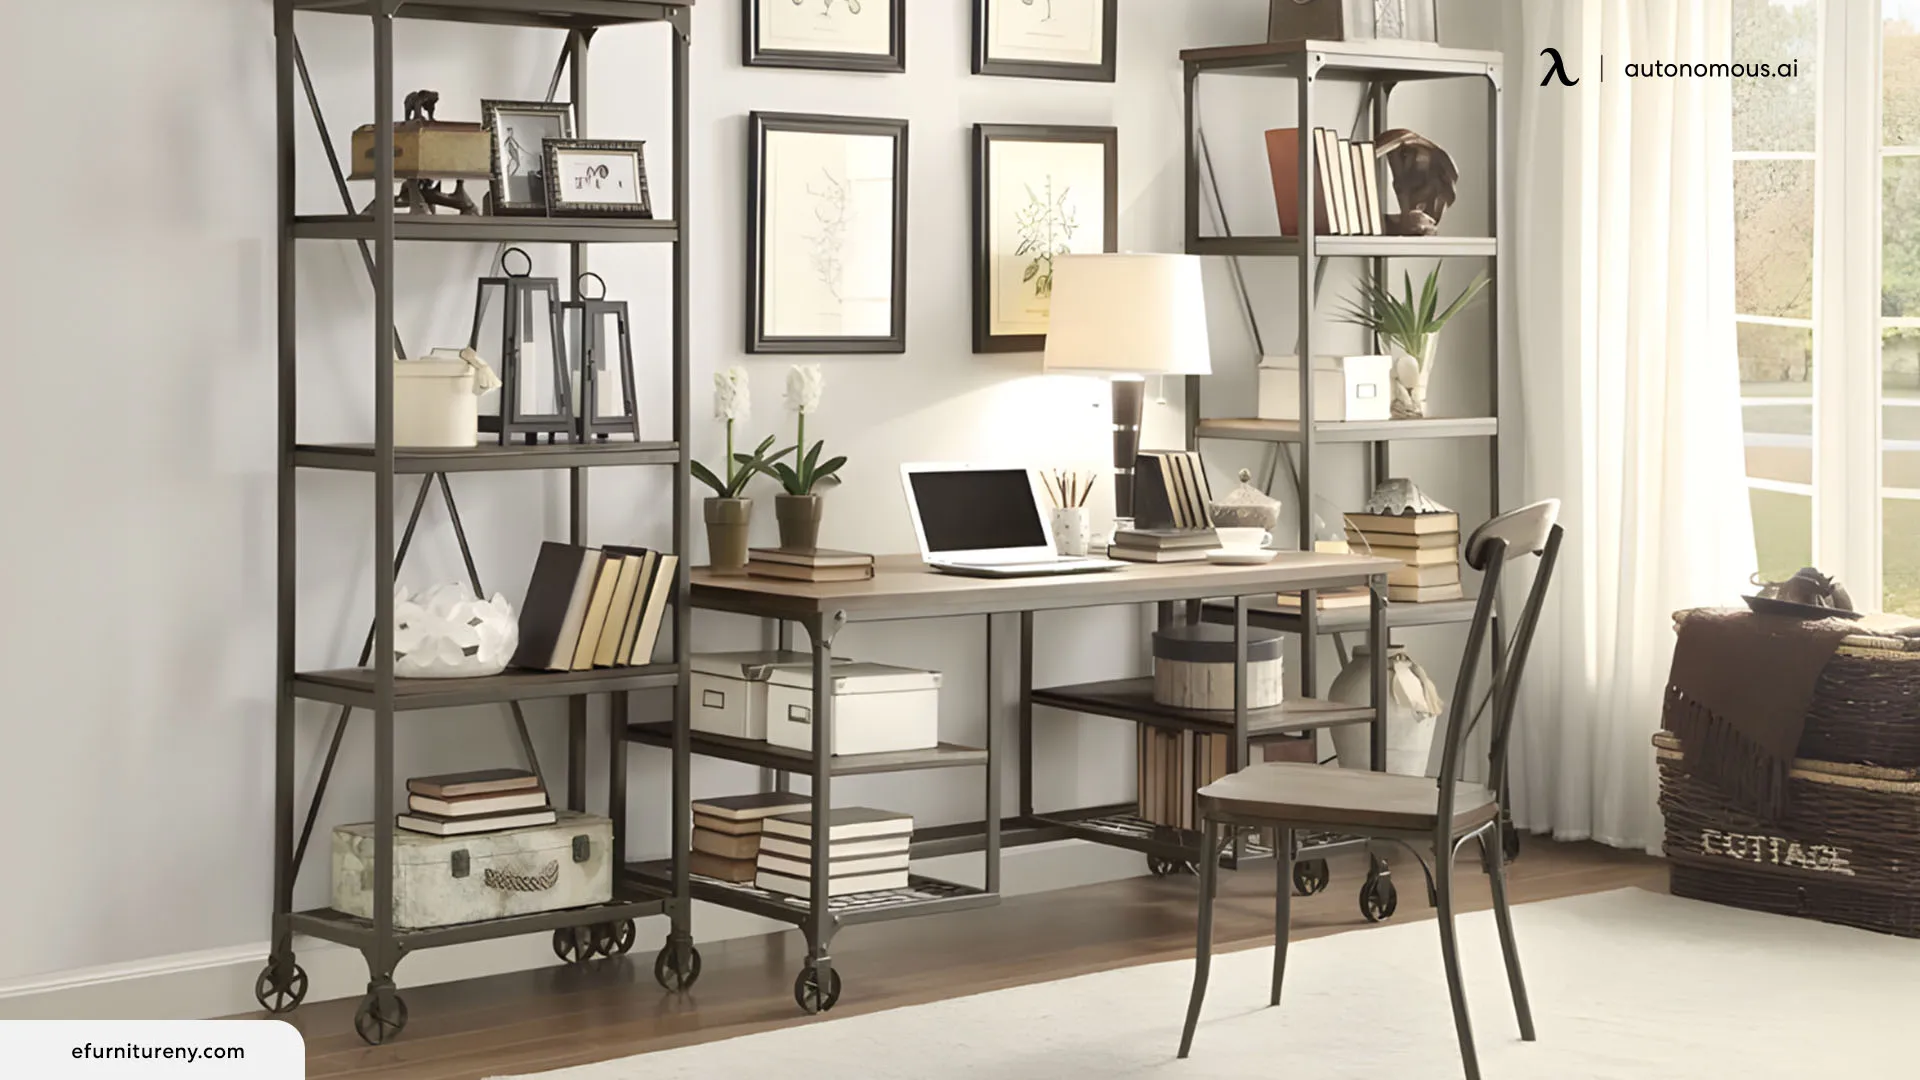 Exceptional Furniture NY - Office Furniture Brooklyn NY